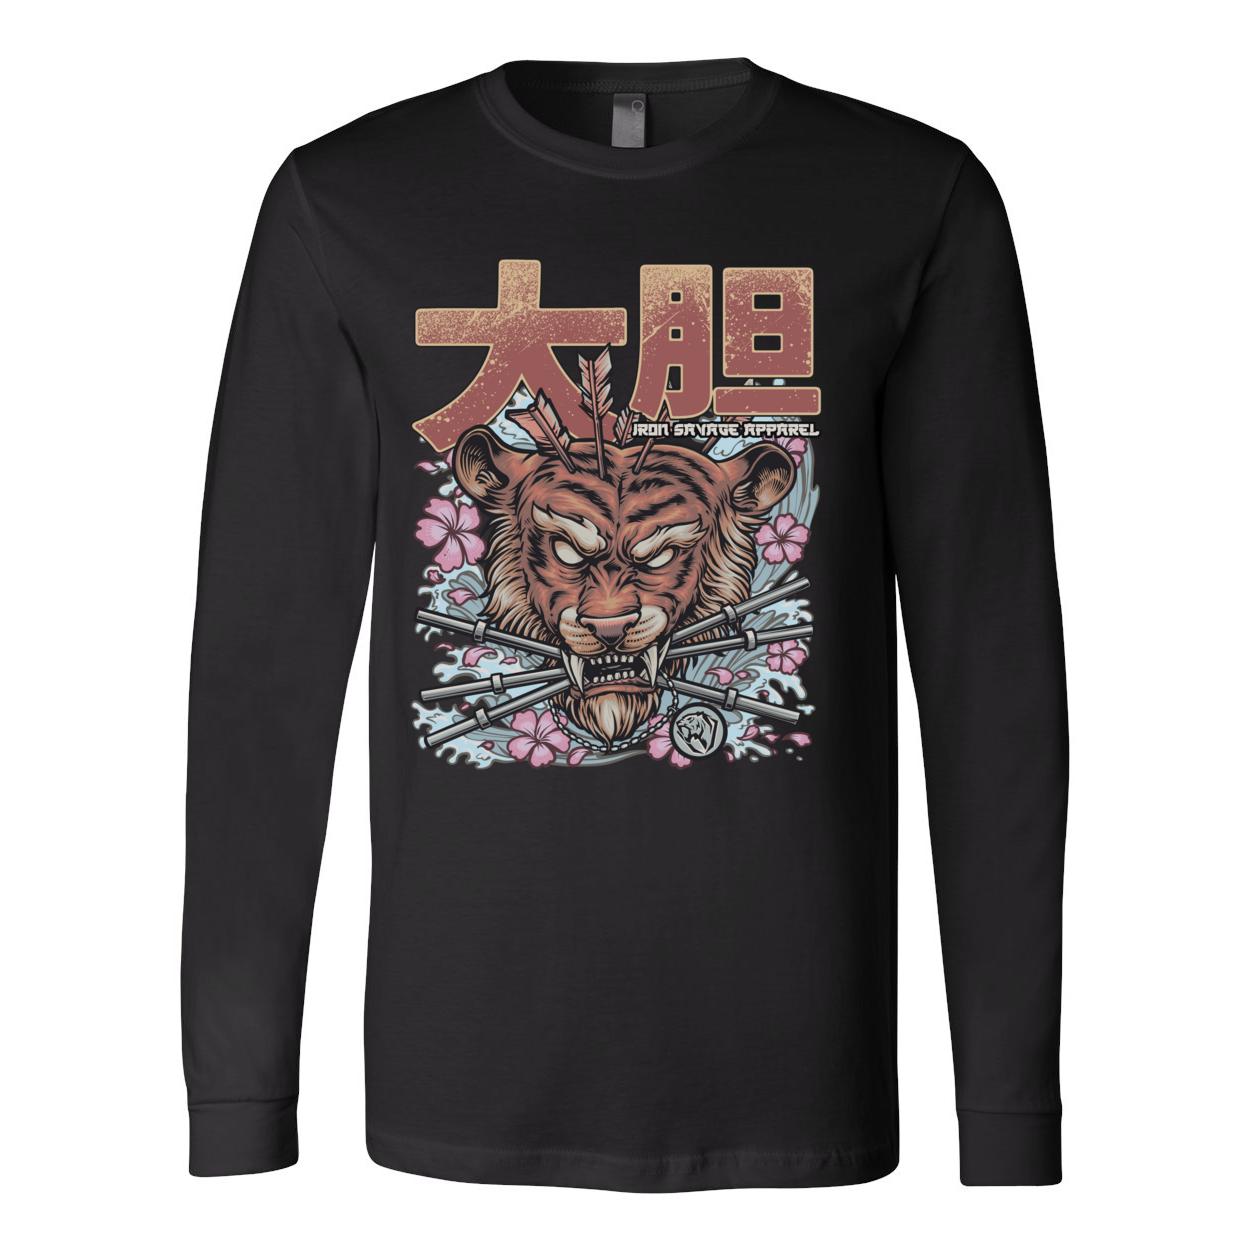 Tiger: Lift Fearlessly Long Sleeve